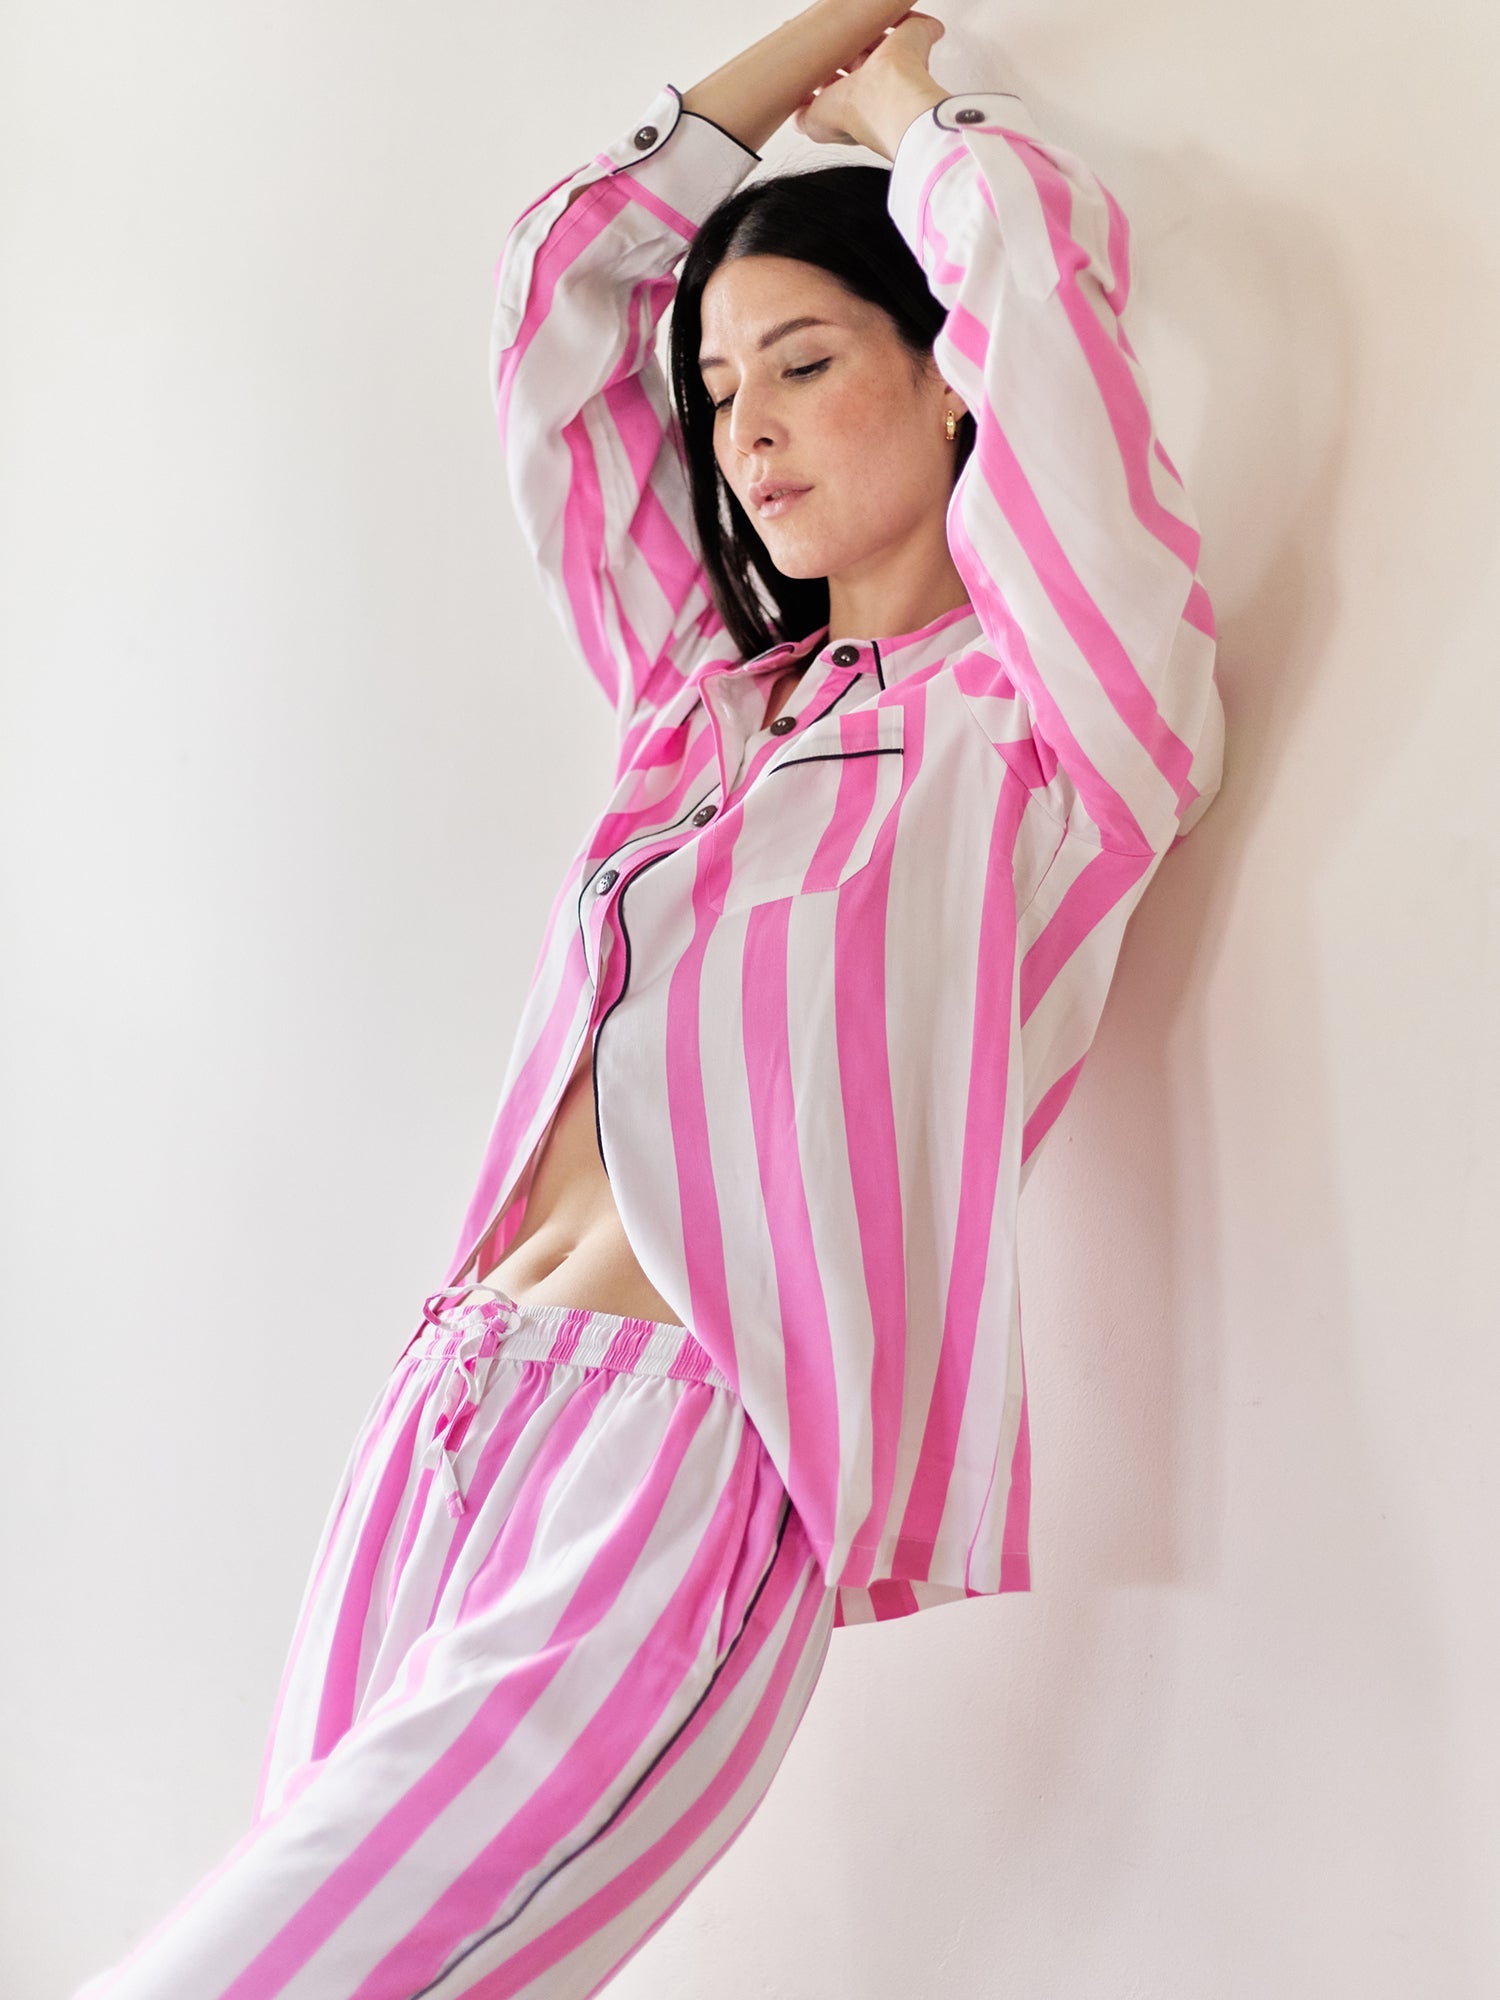 Pink and white striped long-sleeve pajama set with contrasting black piping.